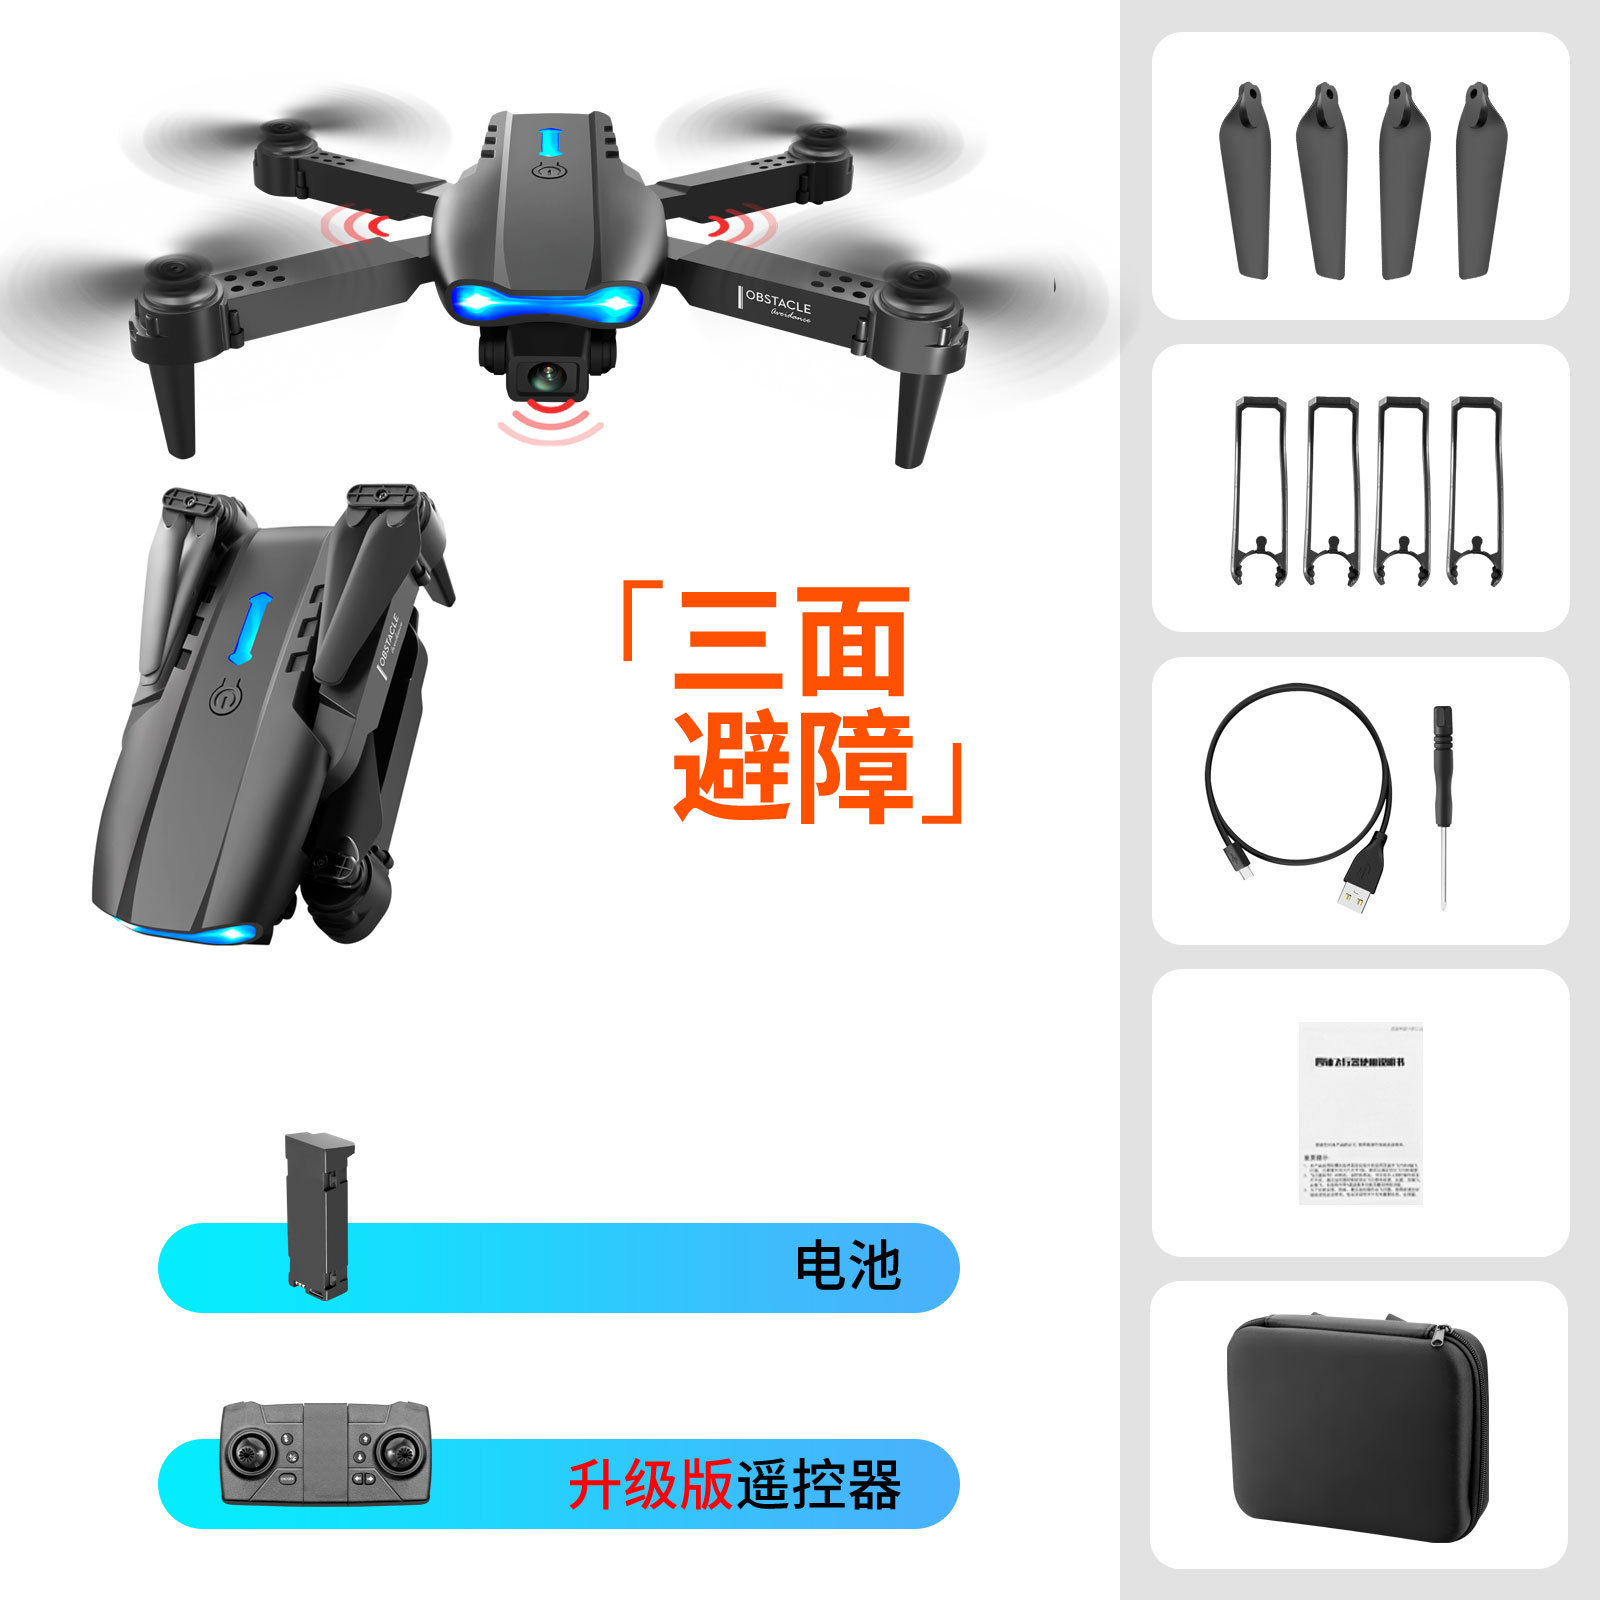 E99 Three-Side Obstacle Avoidance Uav Hd Aerial Photography Folding Quadrocopter Toy K3 Remote Control Aircraft Drone